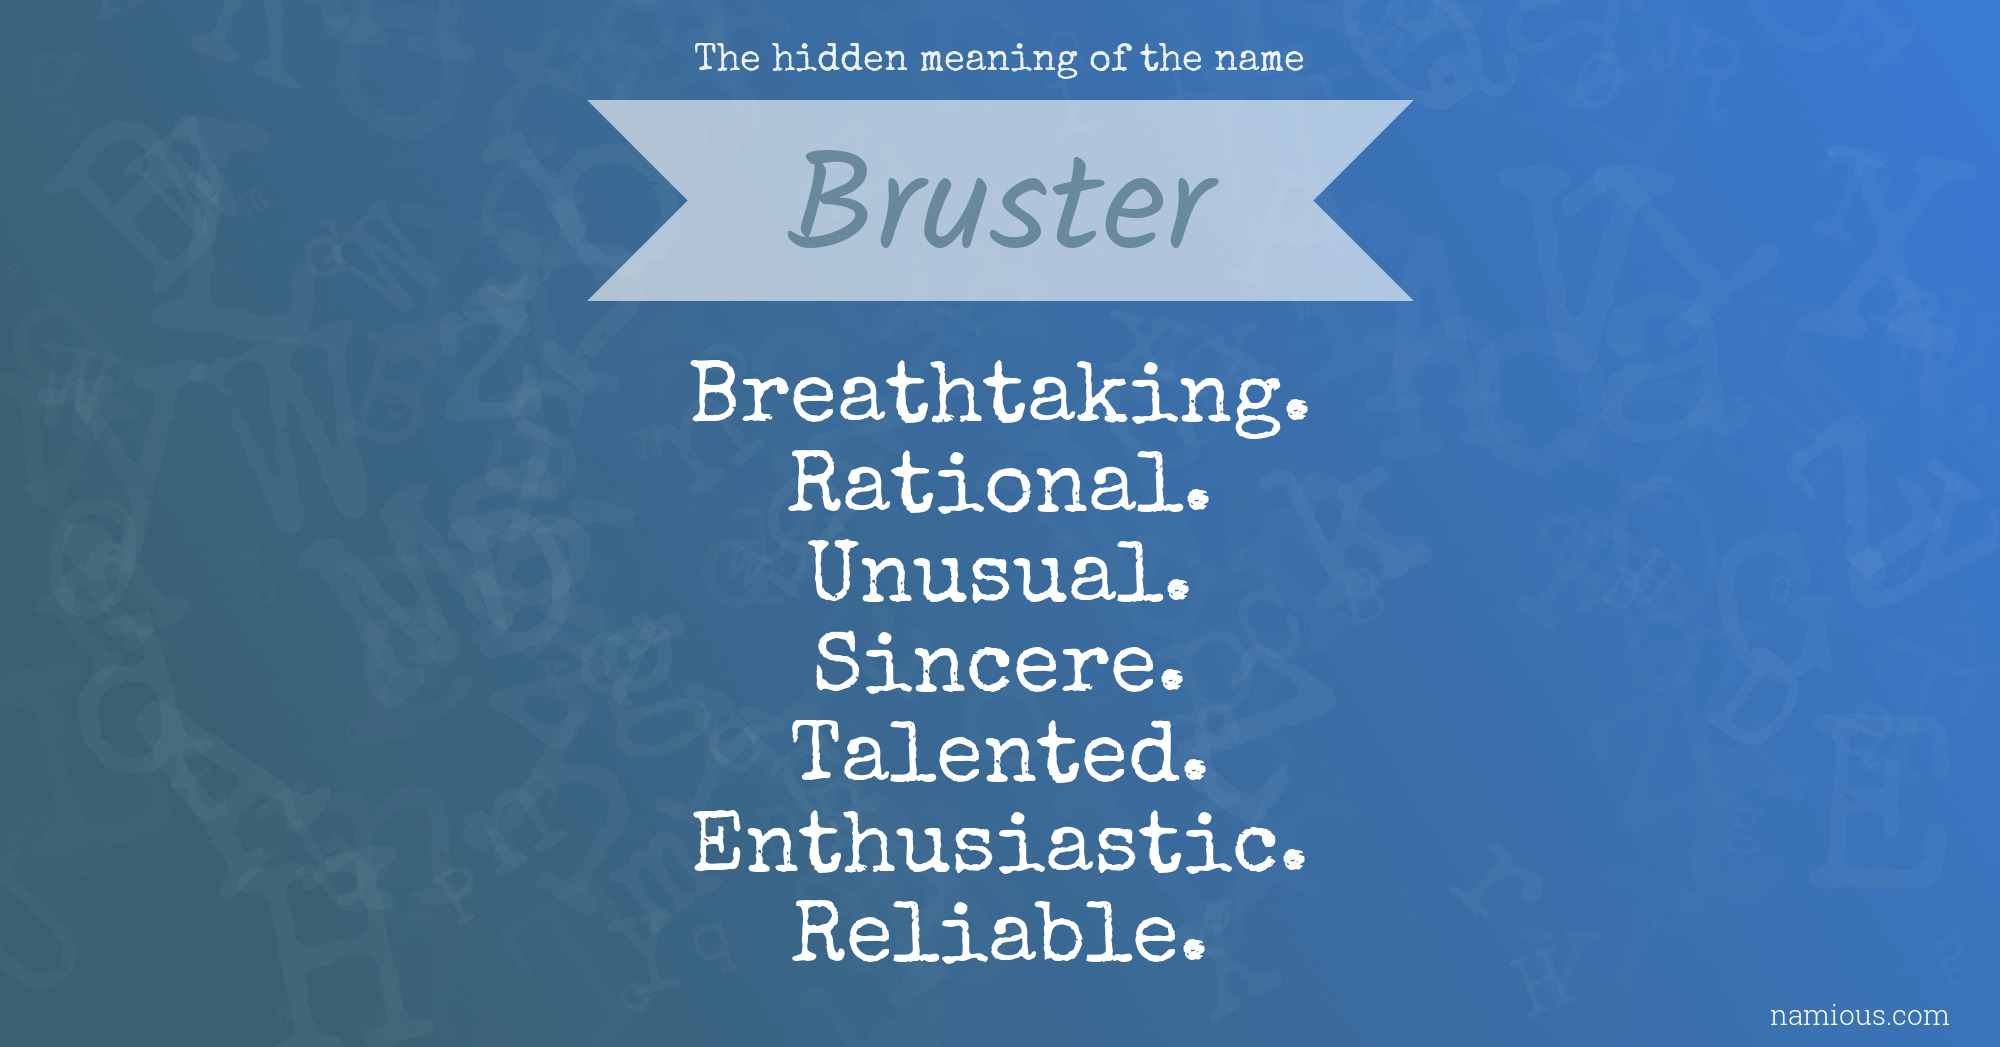 The hidden meaning of the name Bruster